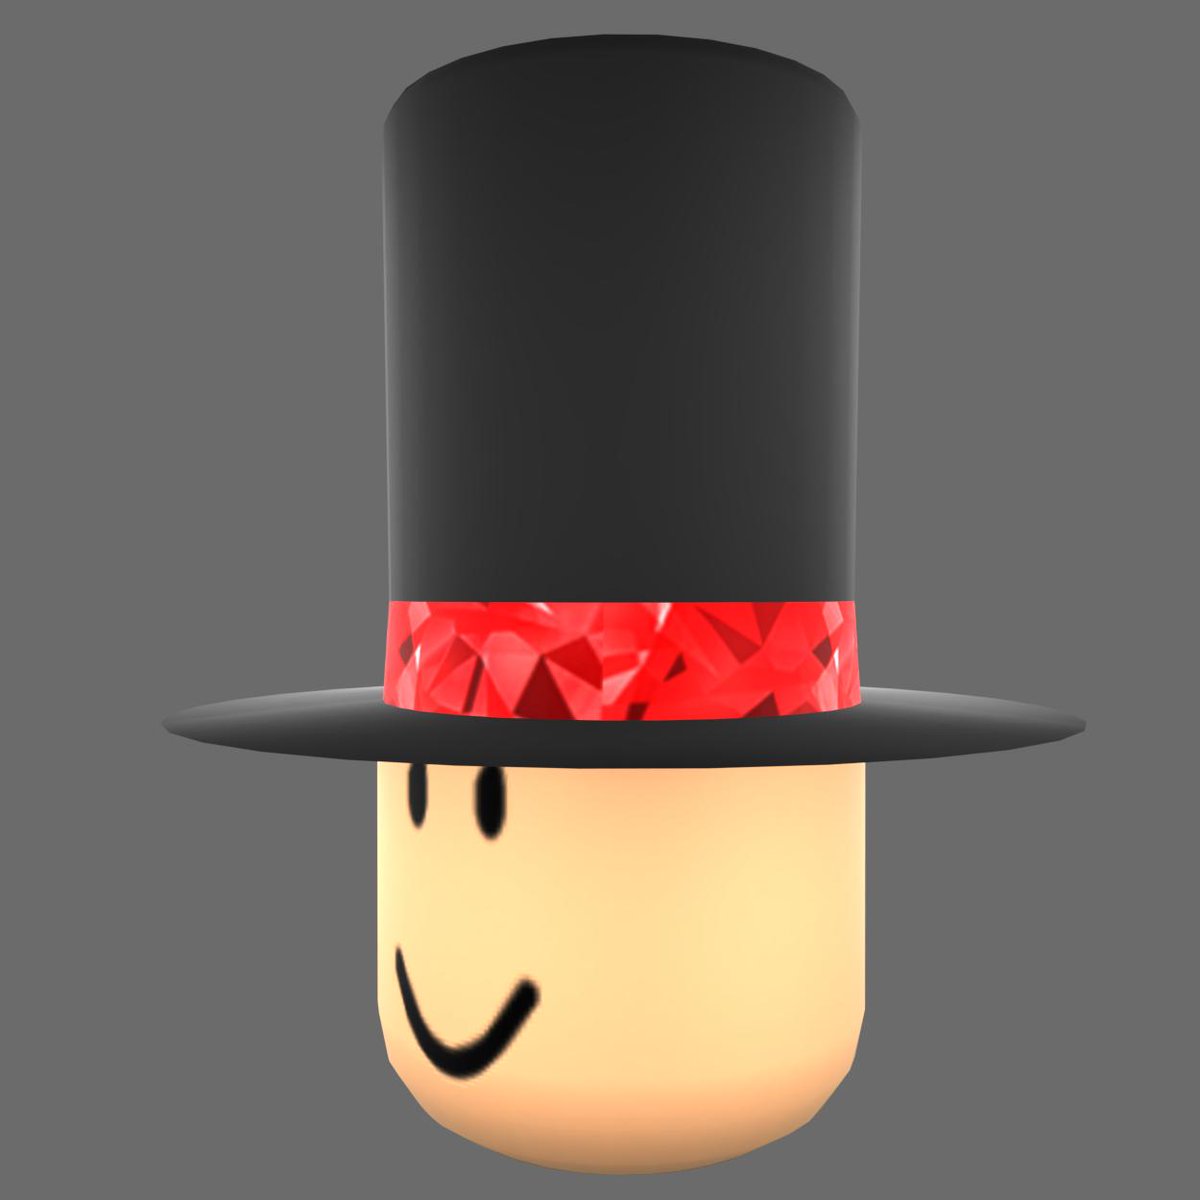 Ugc Concepts - roblox hat stack